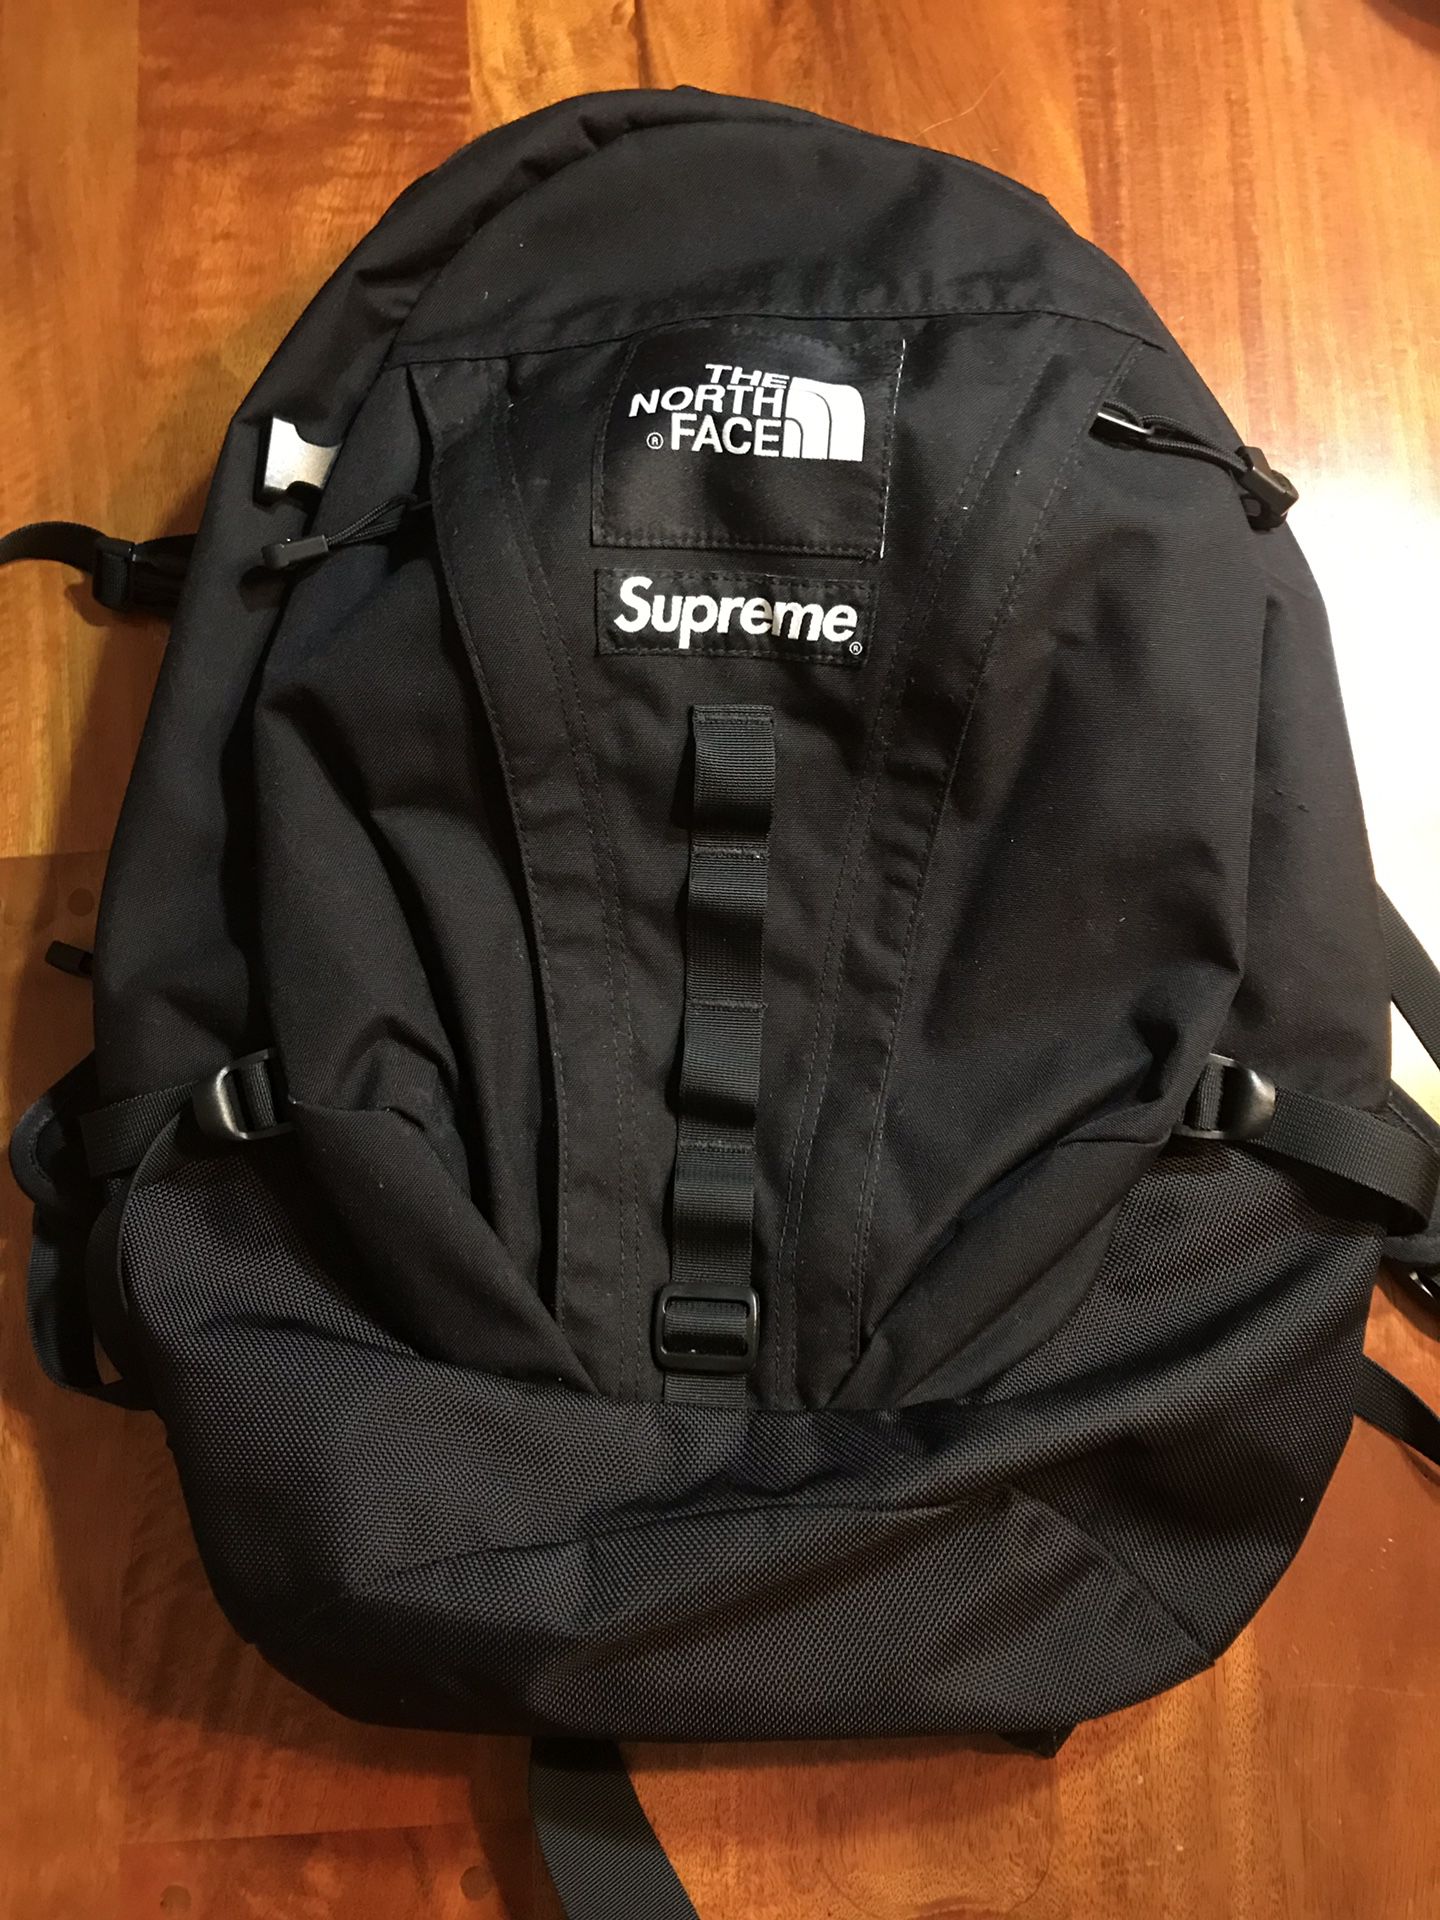 Supreme x North Face backpack